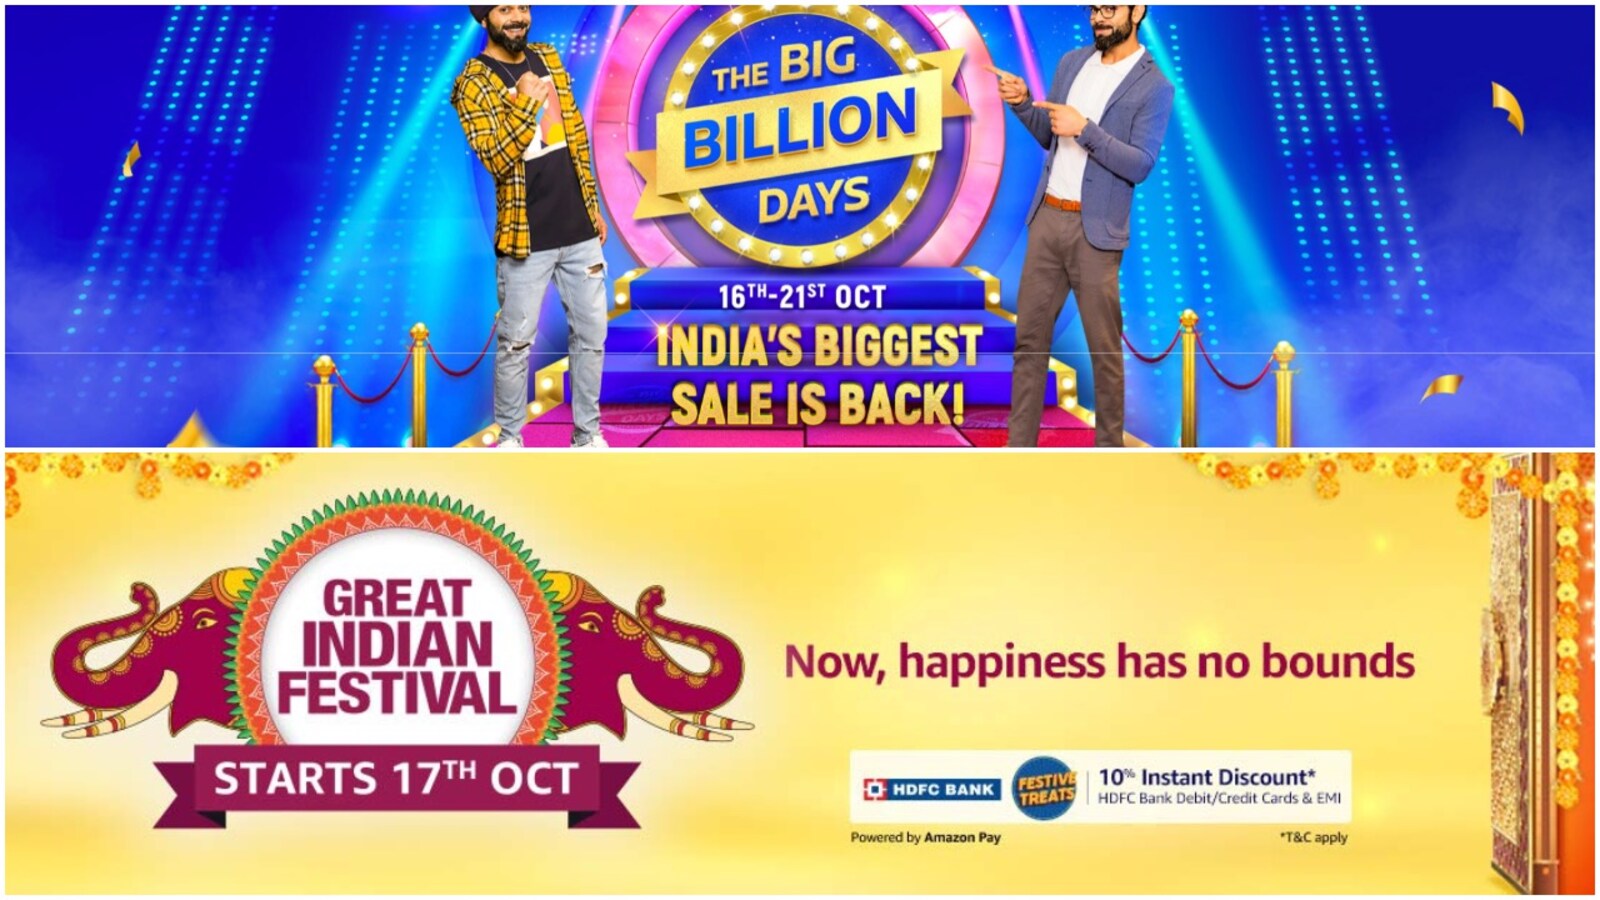 Employees meditate, laugh out loud as Flipkart hits Big Billion Days sale  today